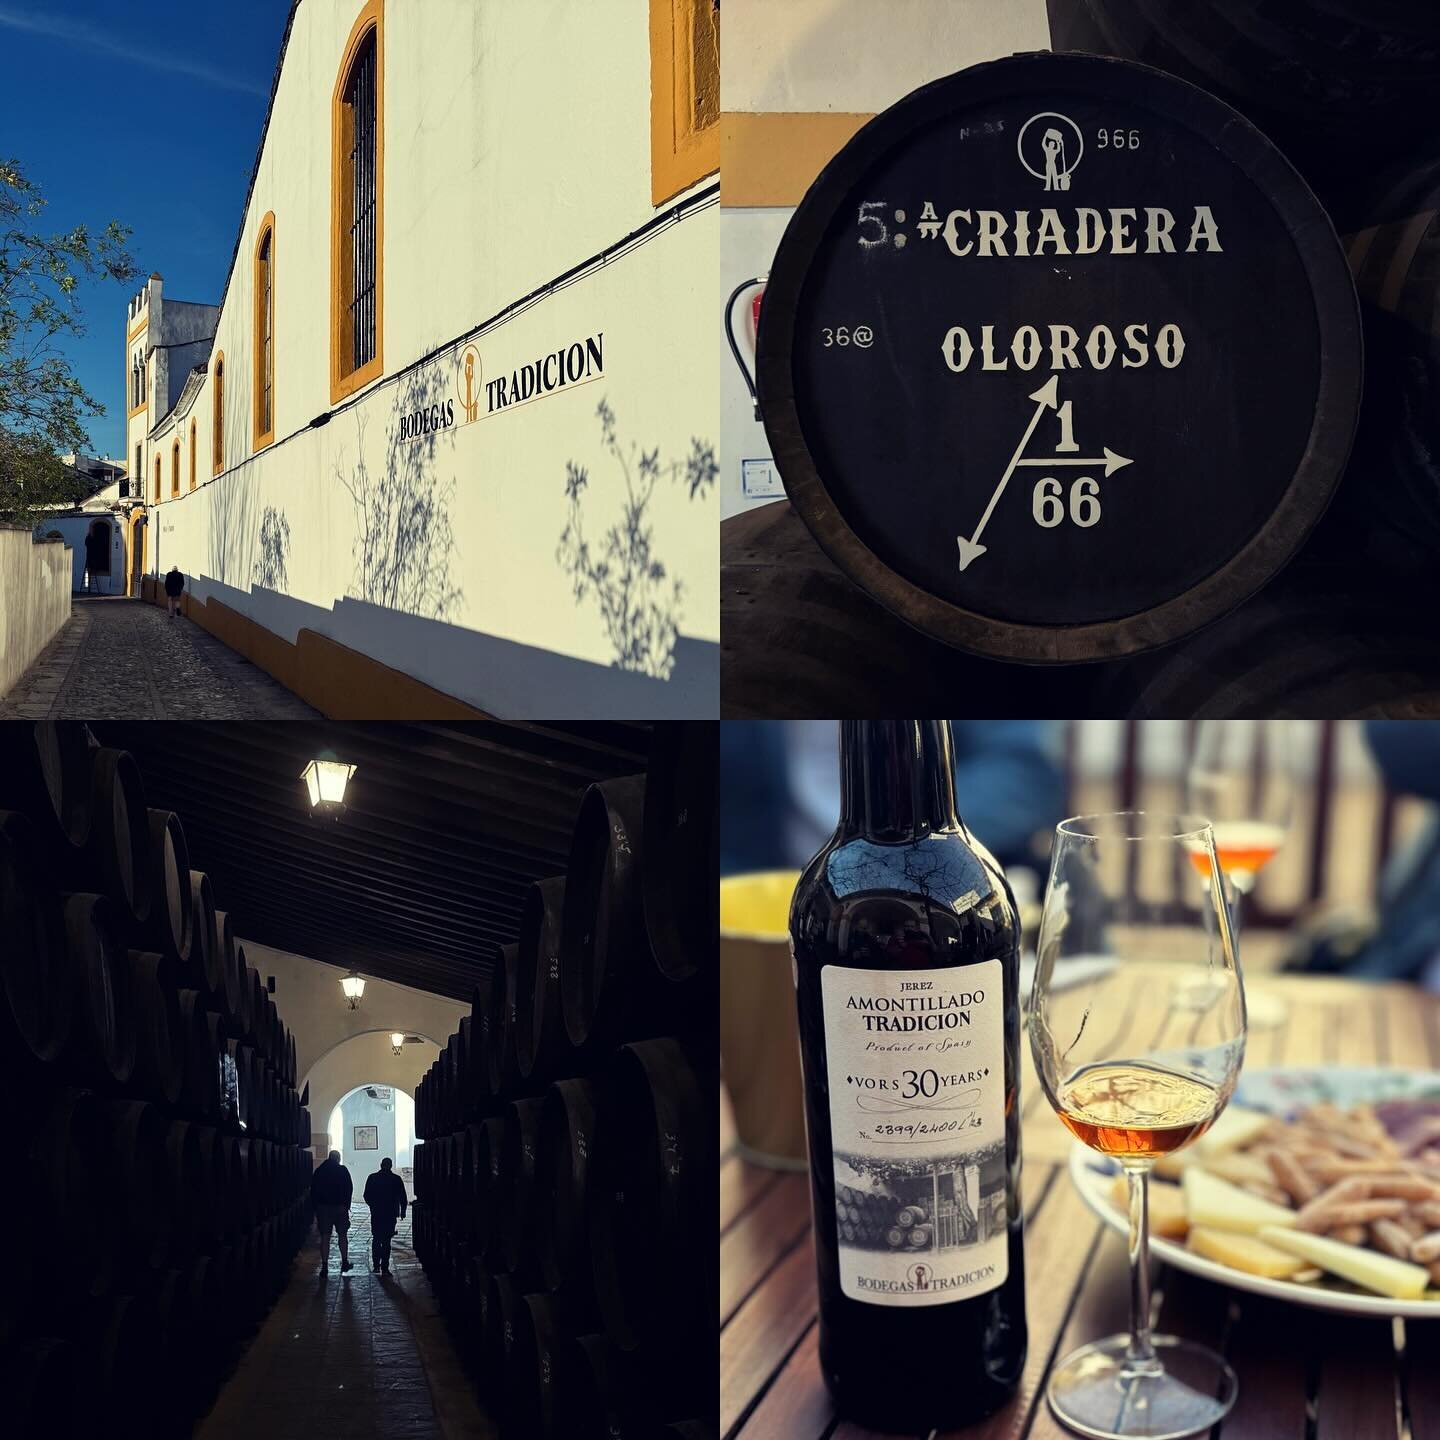 Having ticked off all the major #sherry producers in #jerez over the years, there was a one property I had never managed to visit - @bodegastradicion - a most interesting producer who focusses mainly on VORs expressions. I was pleased to finally enjo